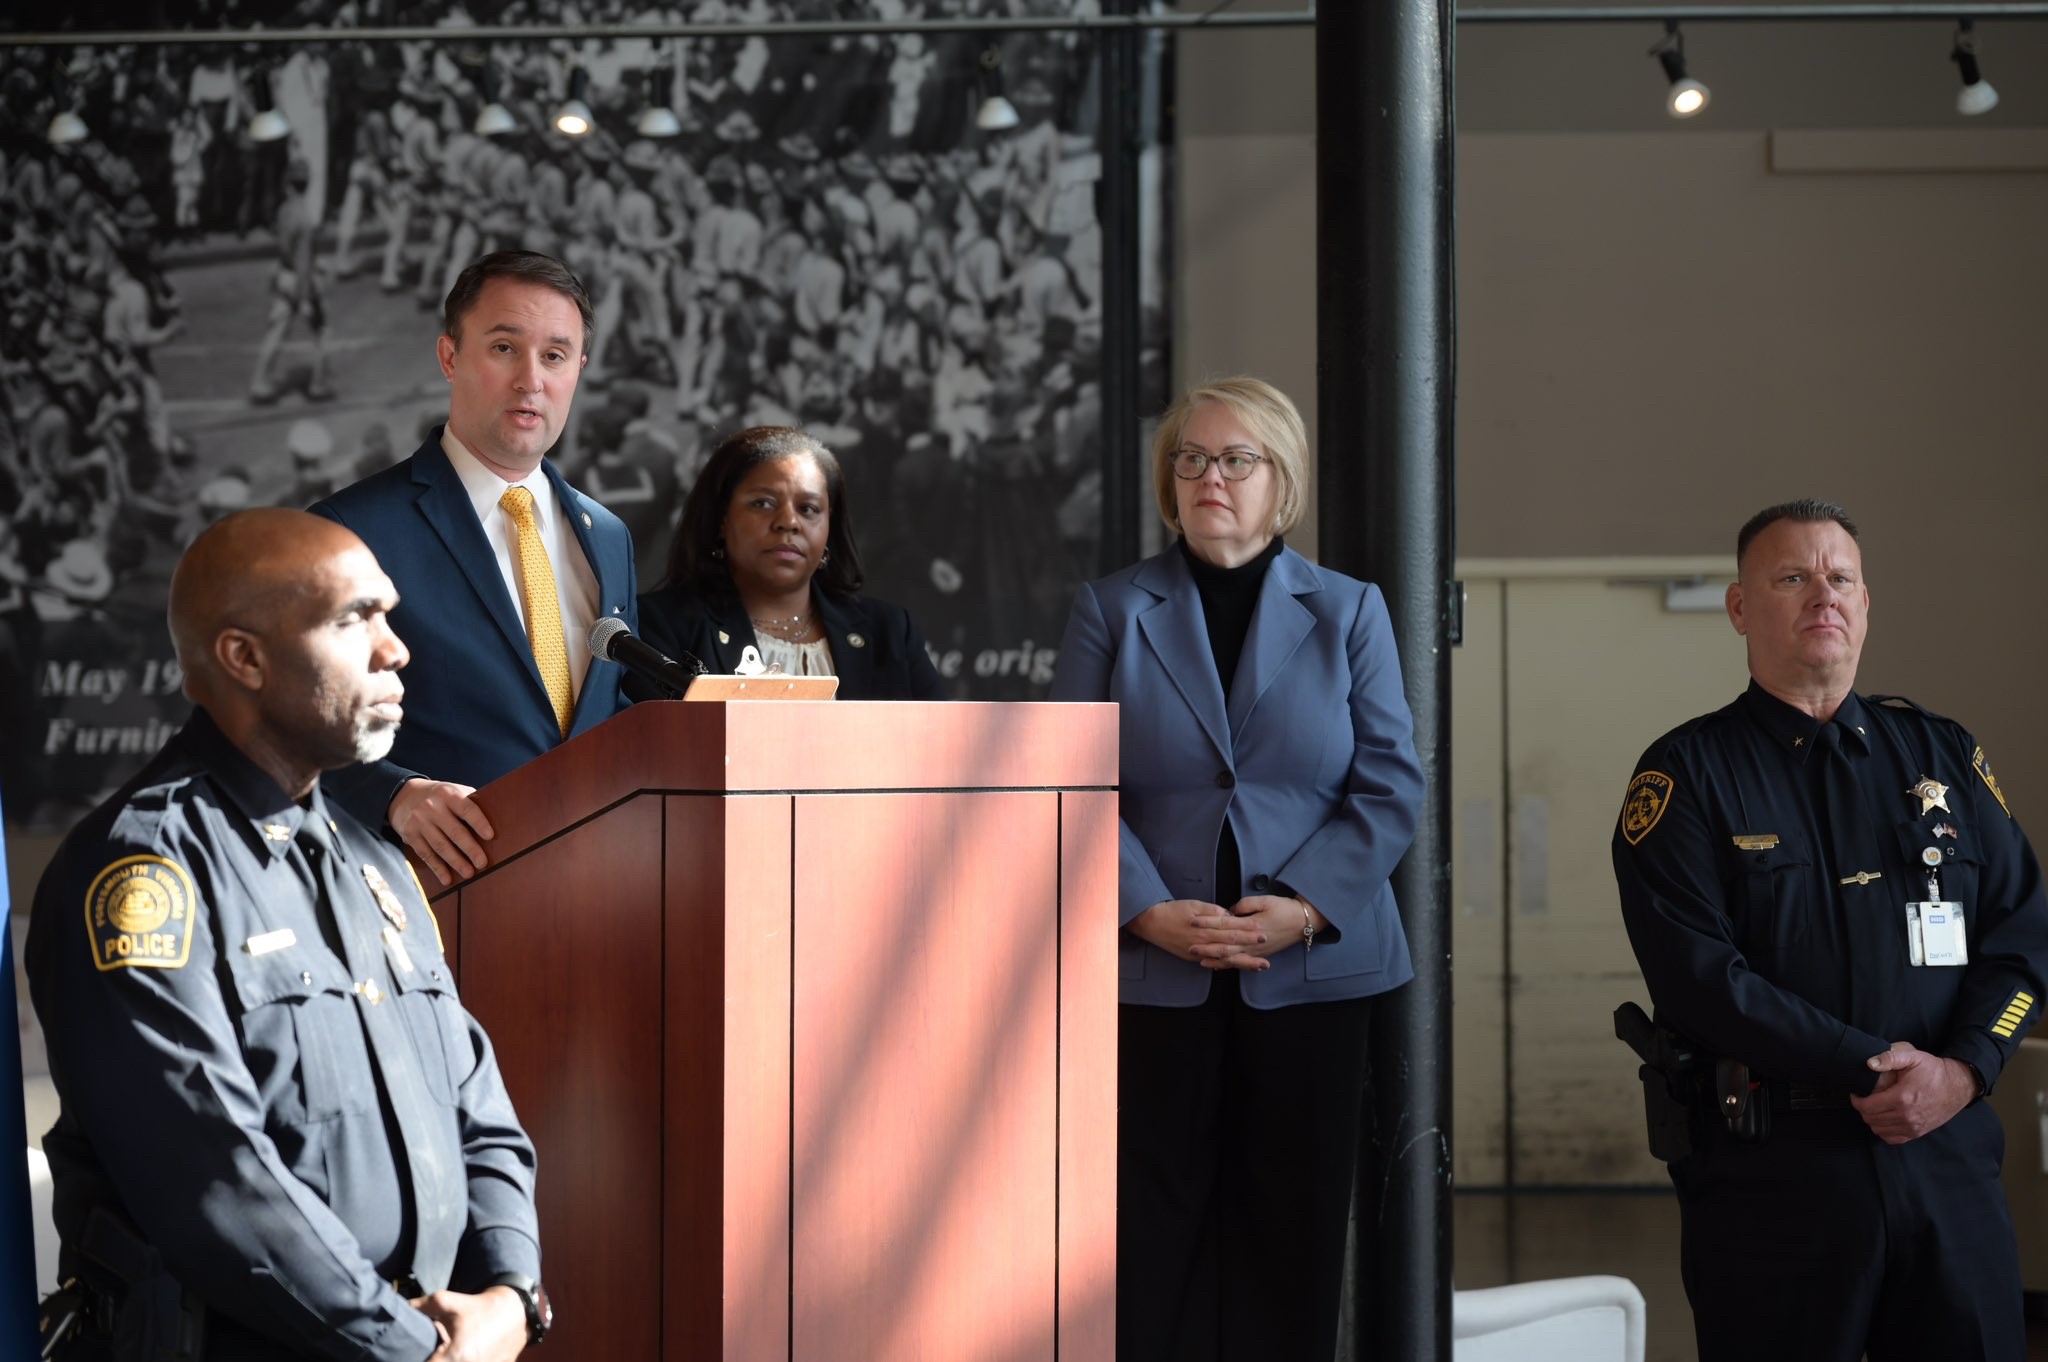 Attorney General Jason Miyares, Robin Gauthier, Executive Director of Samaritan House, presenting at a Press Conference for 100% BATT (Businesses Alliance Against Trafficking)